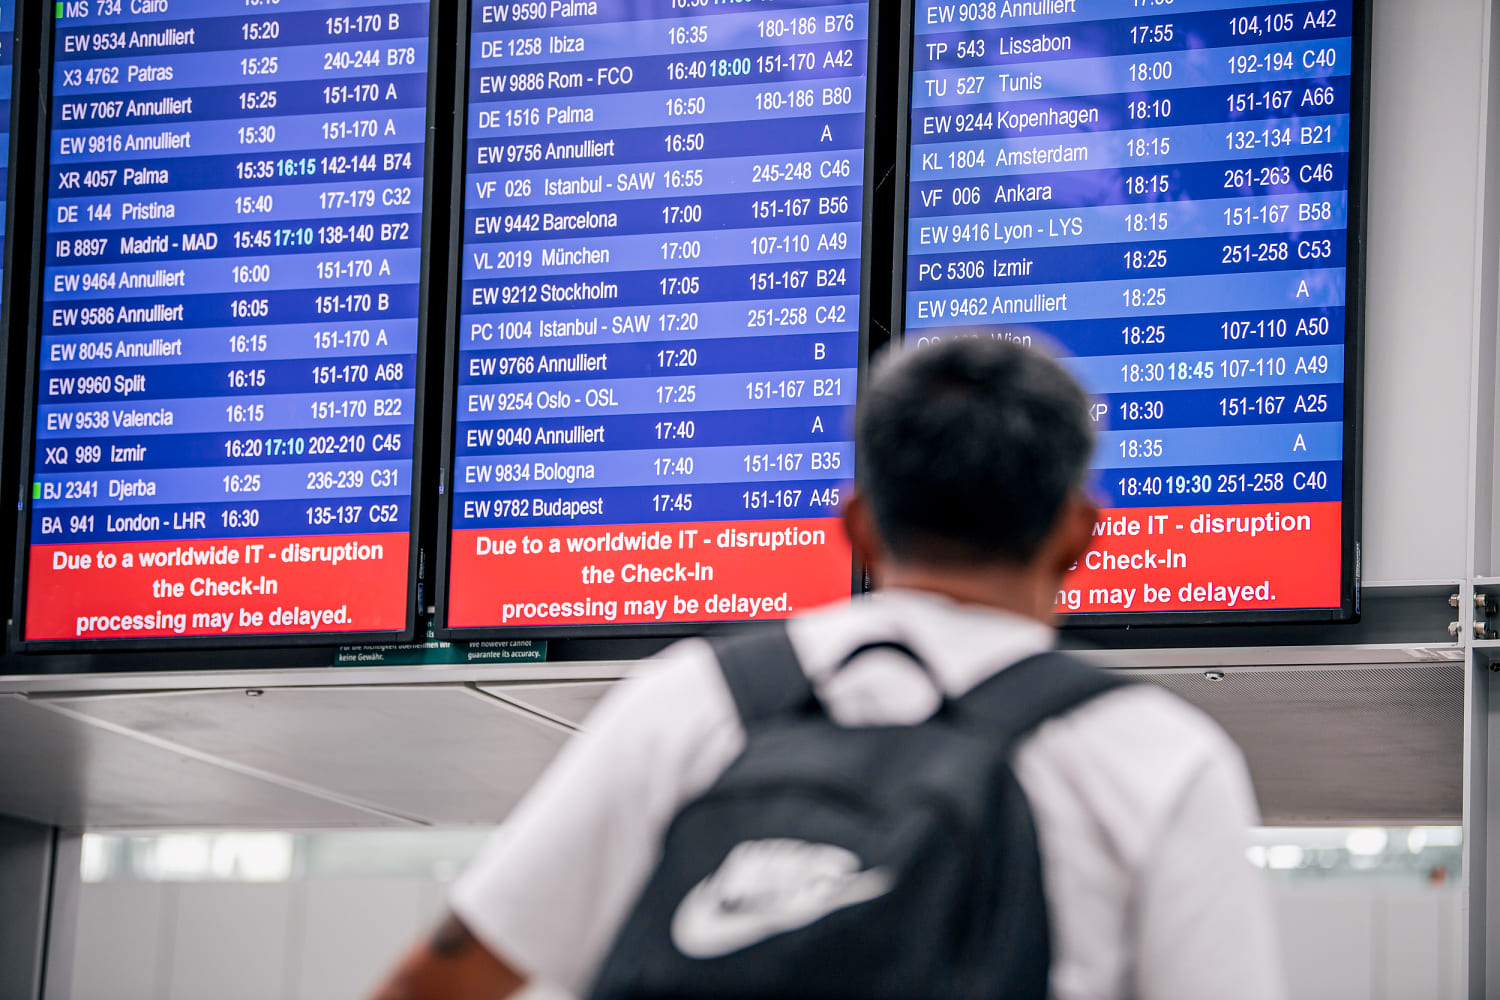 Companies, airlines scramble to recover after global IT outage disrupts business worldwide